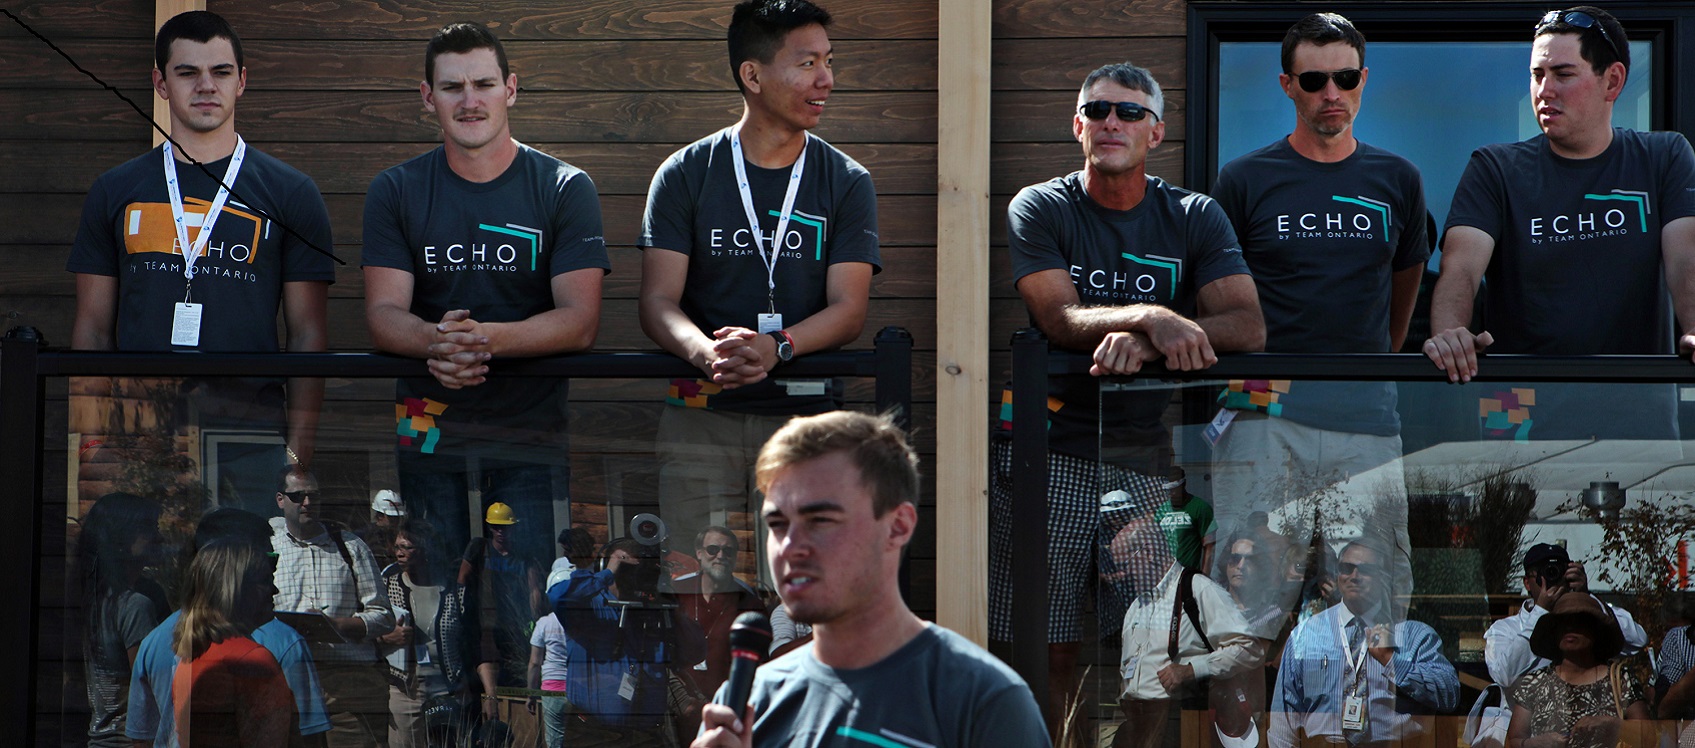 A team of college students stands on the porch of their Solar Decathlon home while one student speaks into a microphone.